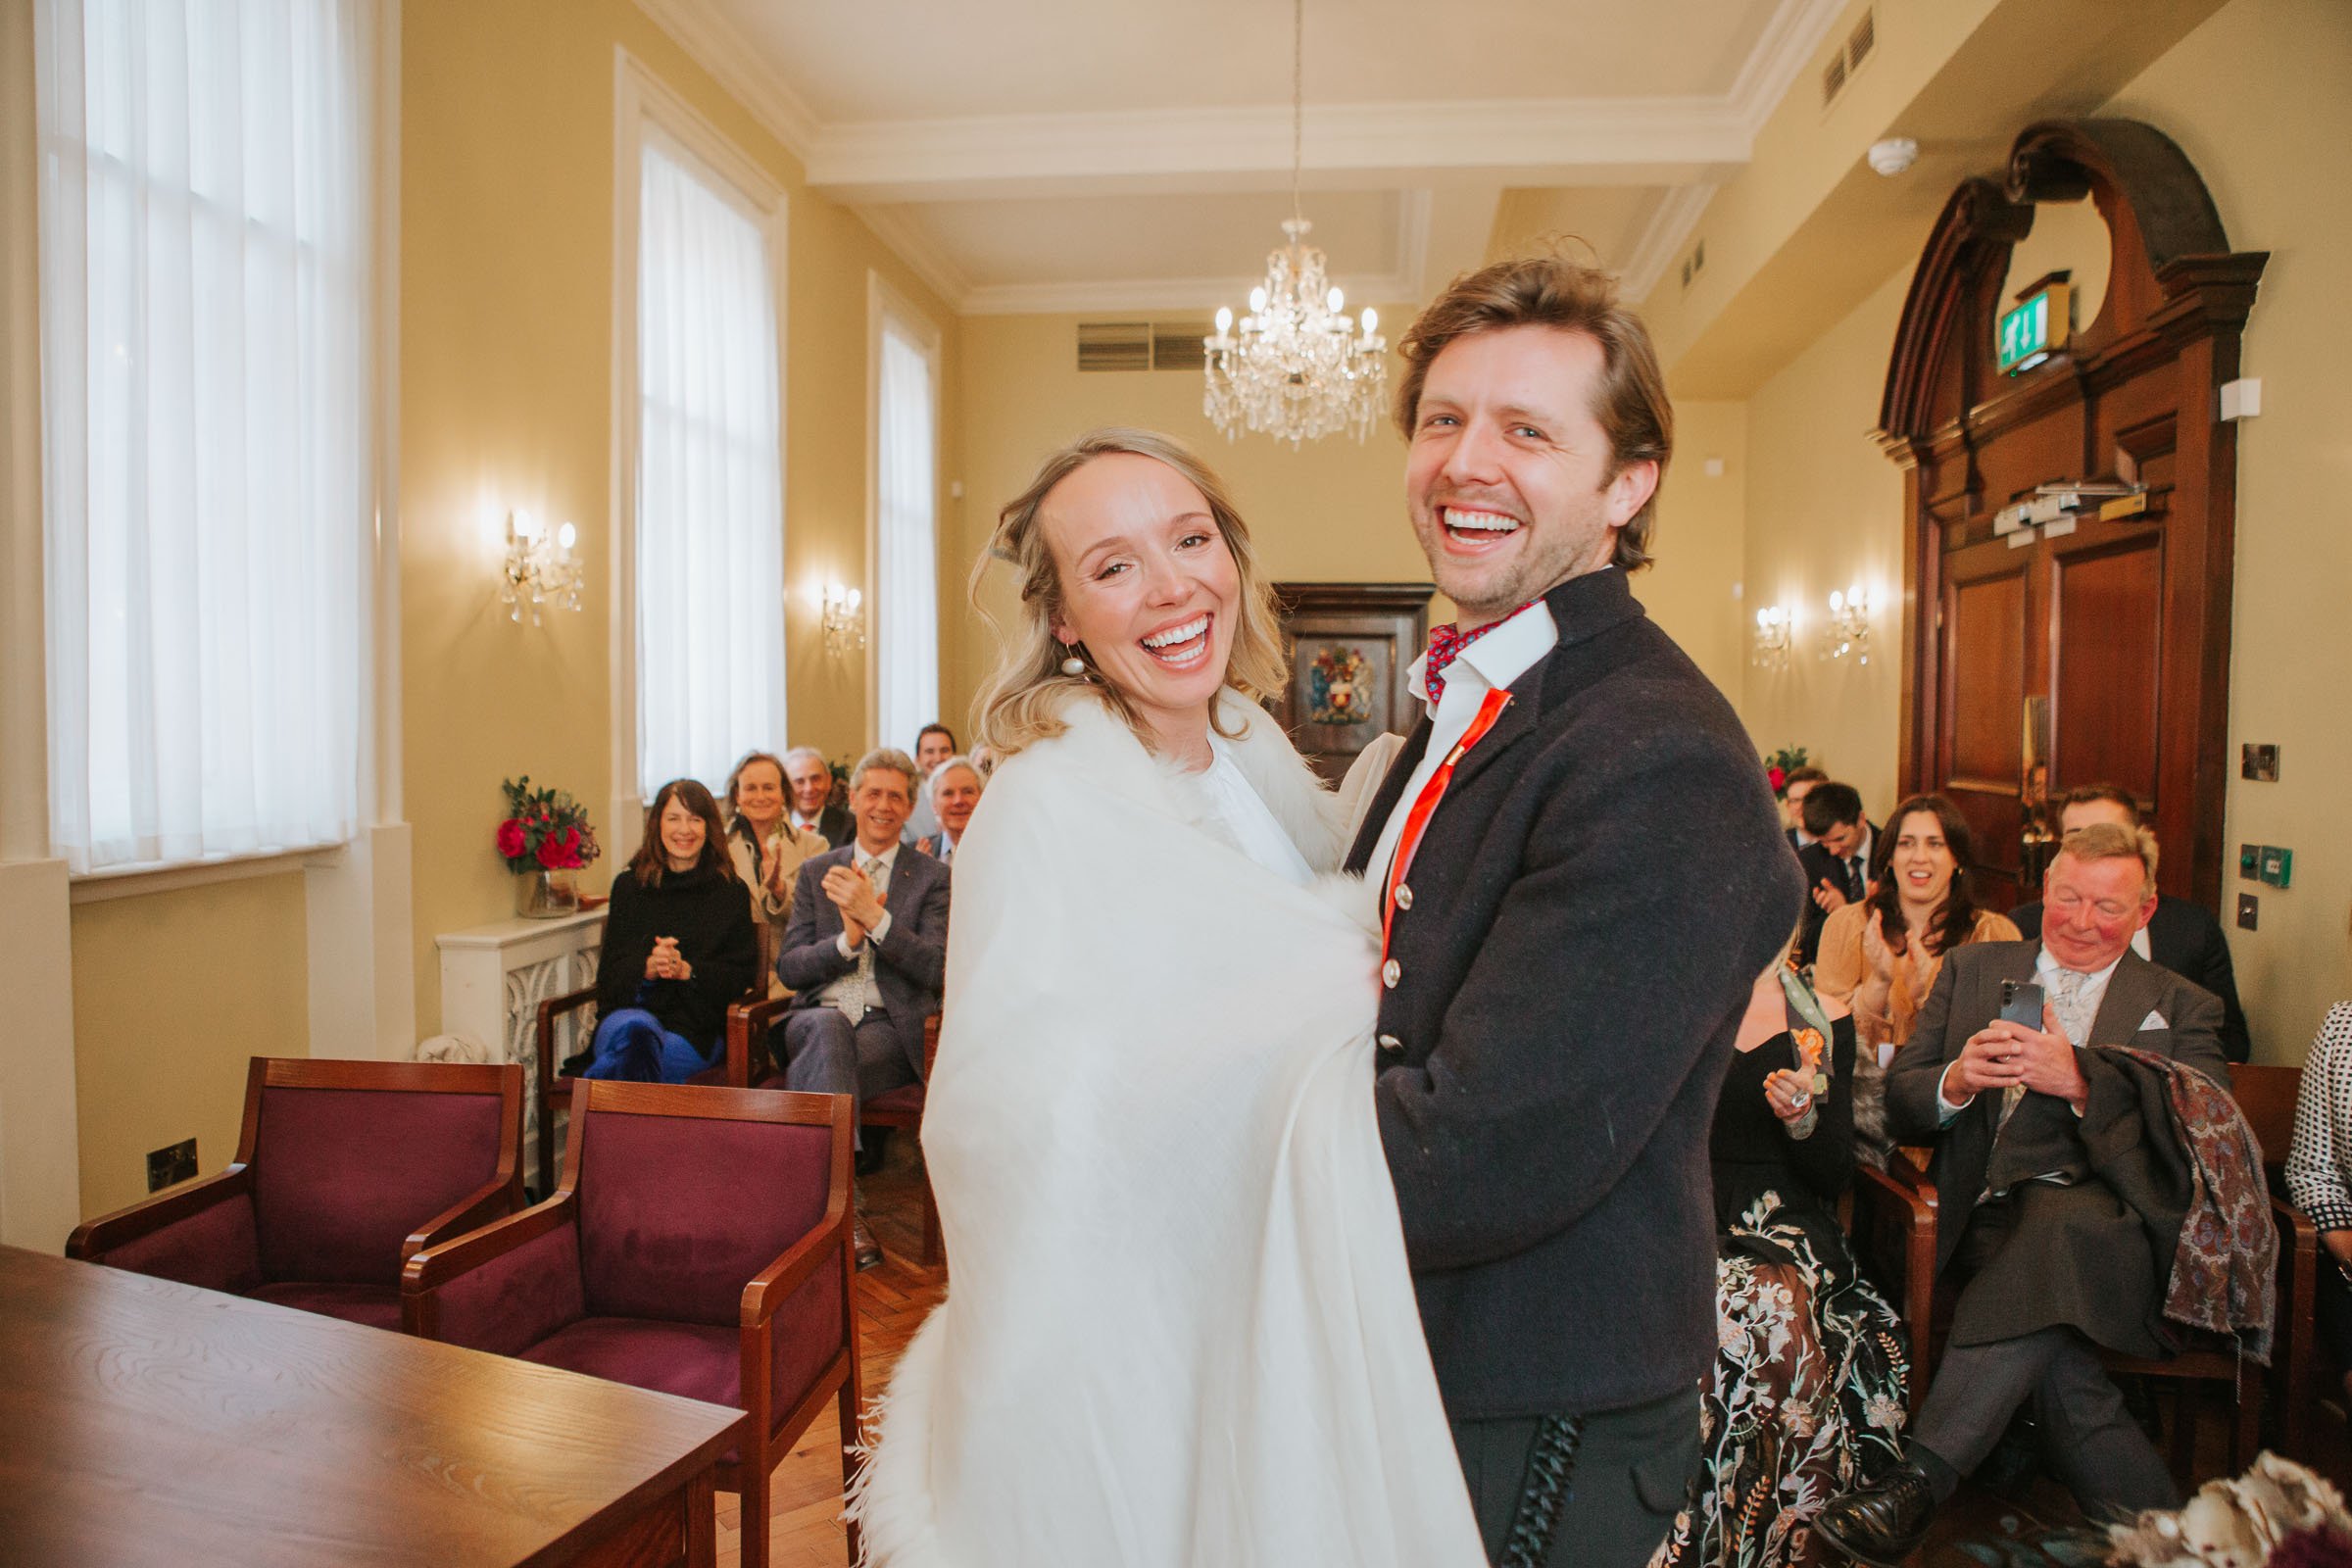  Newly married Lizzie and Max standing in front of their friends and family in The Byron Room at Chelsea Old Town Hall.  